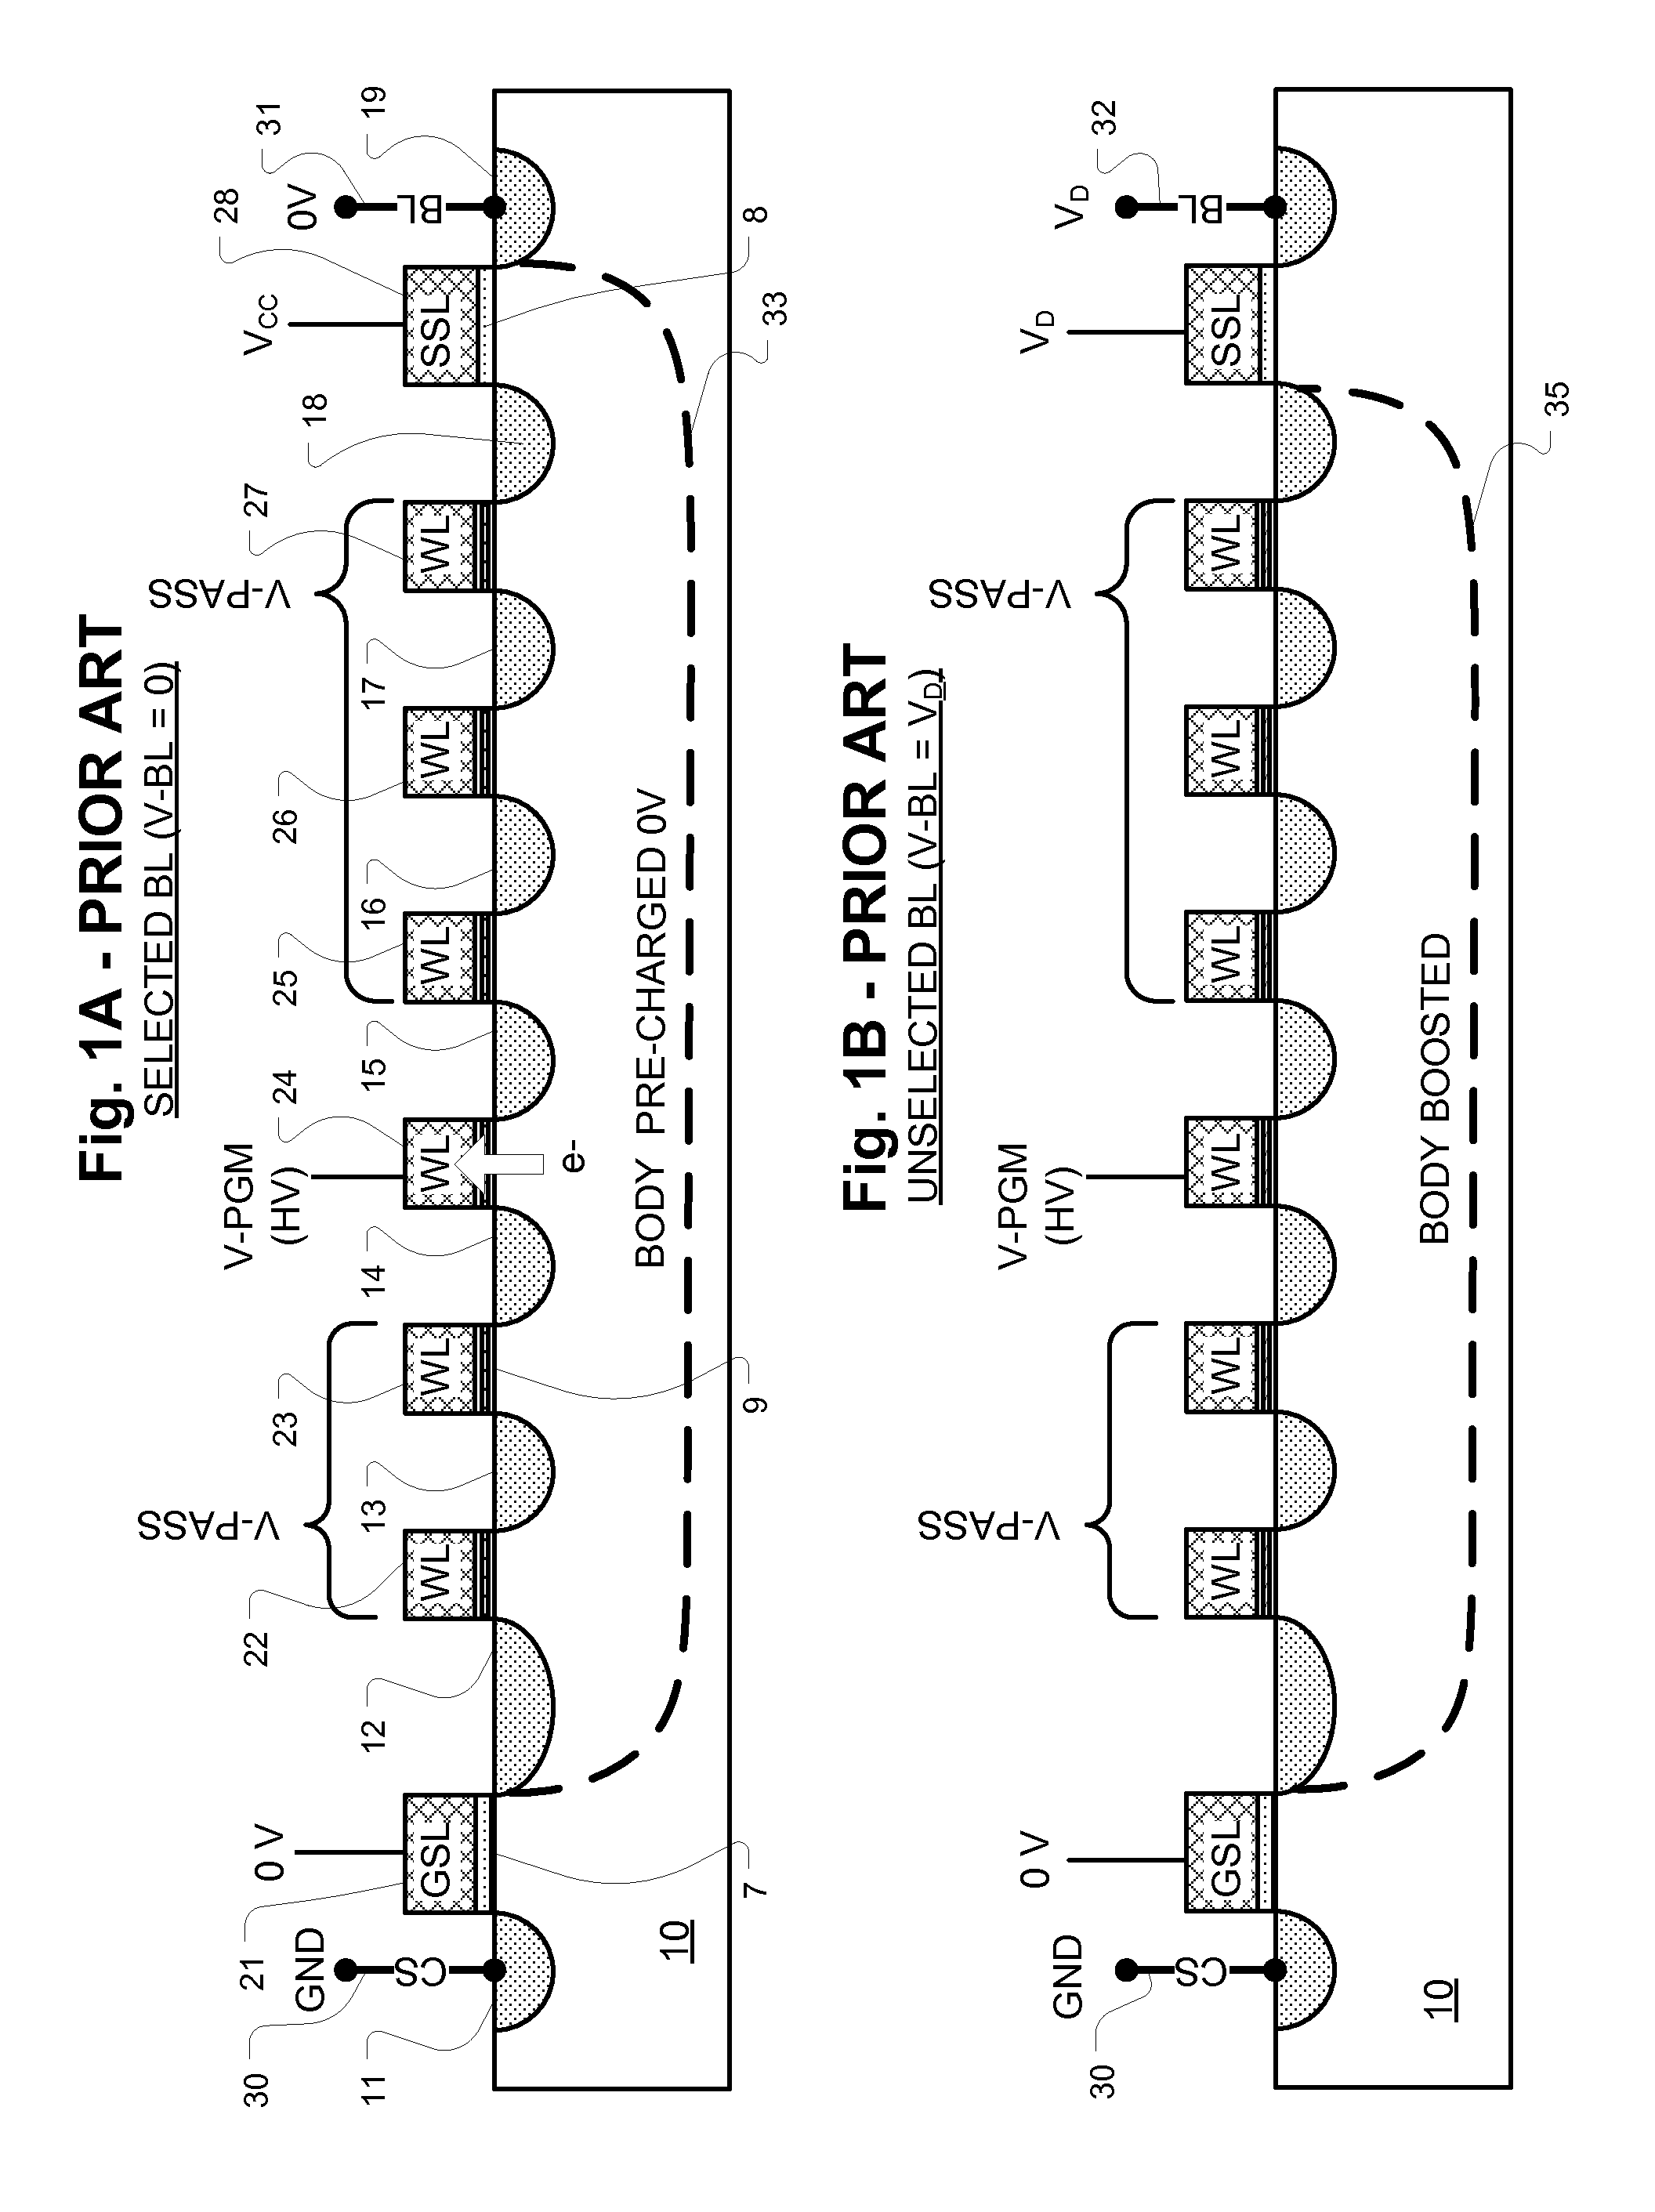 Low voltage programming in NAND flash with two stage source side bias